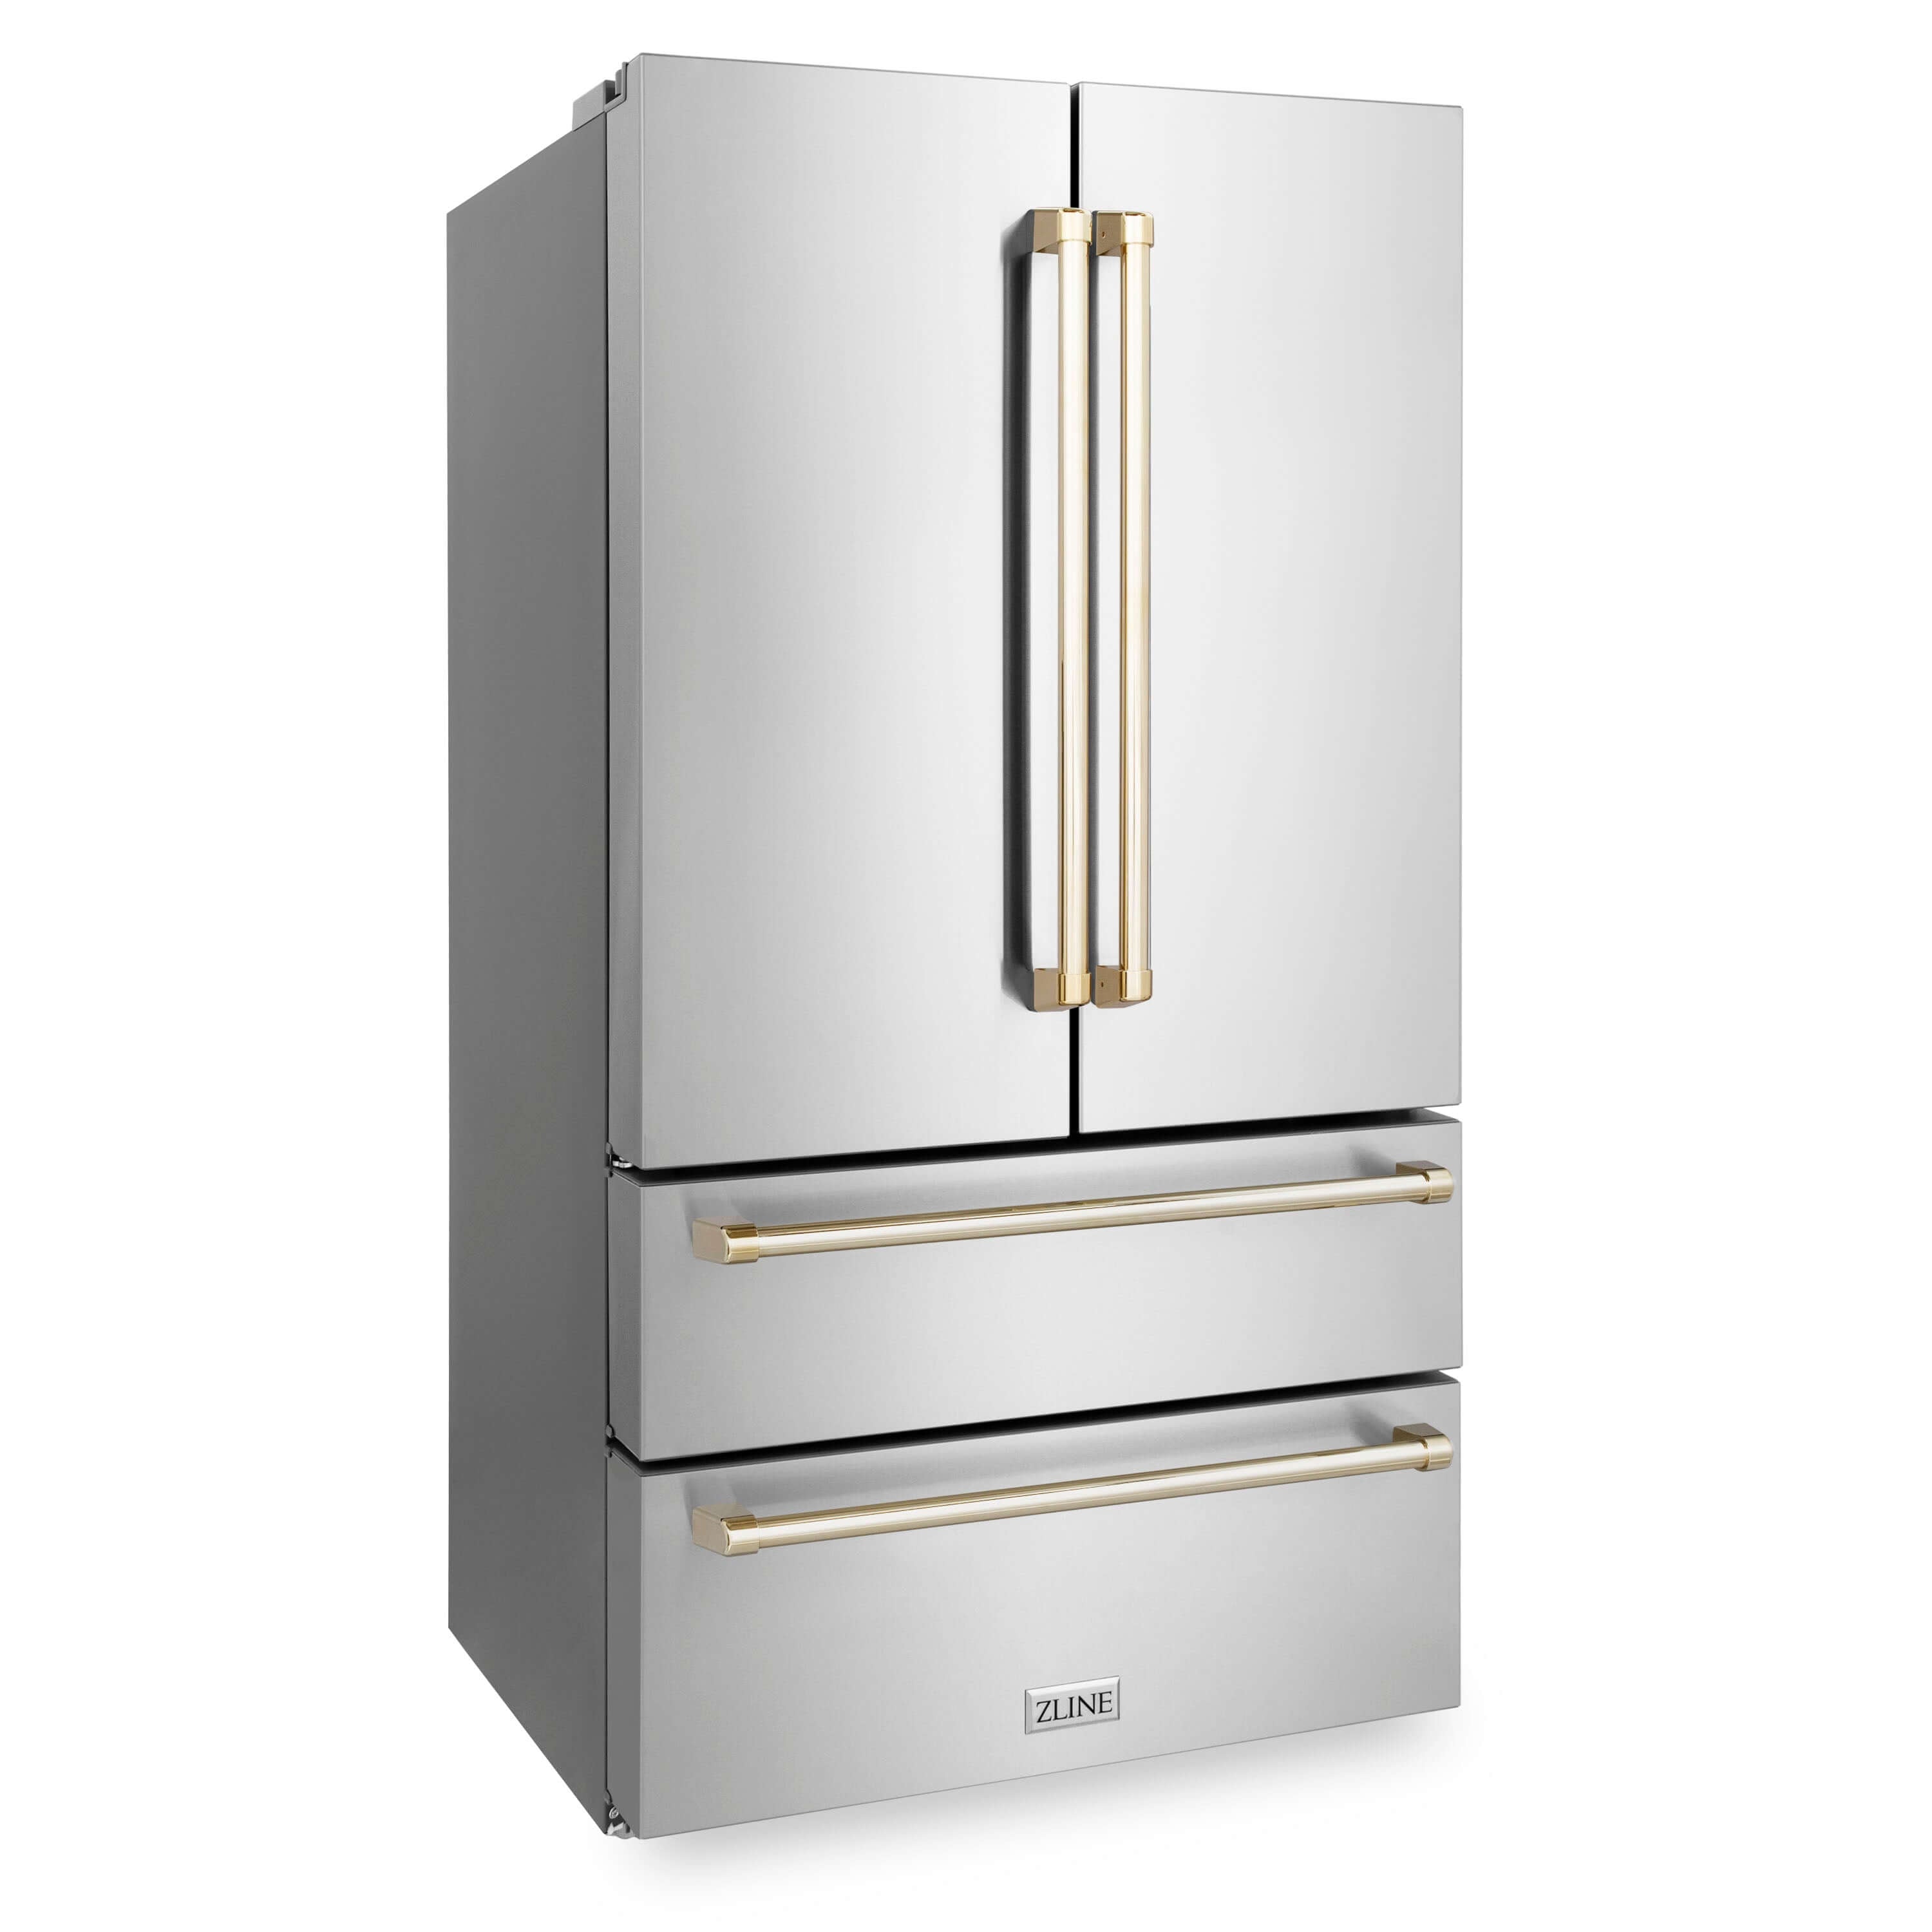 ZLINE Autograph Edition 36 in. French Door Refrigerator in Stainless Steel with Polished Gold Accents (RFMZ-36-G) side, doors closed.